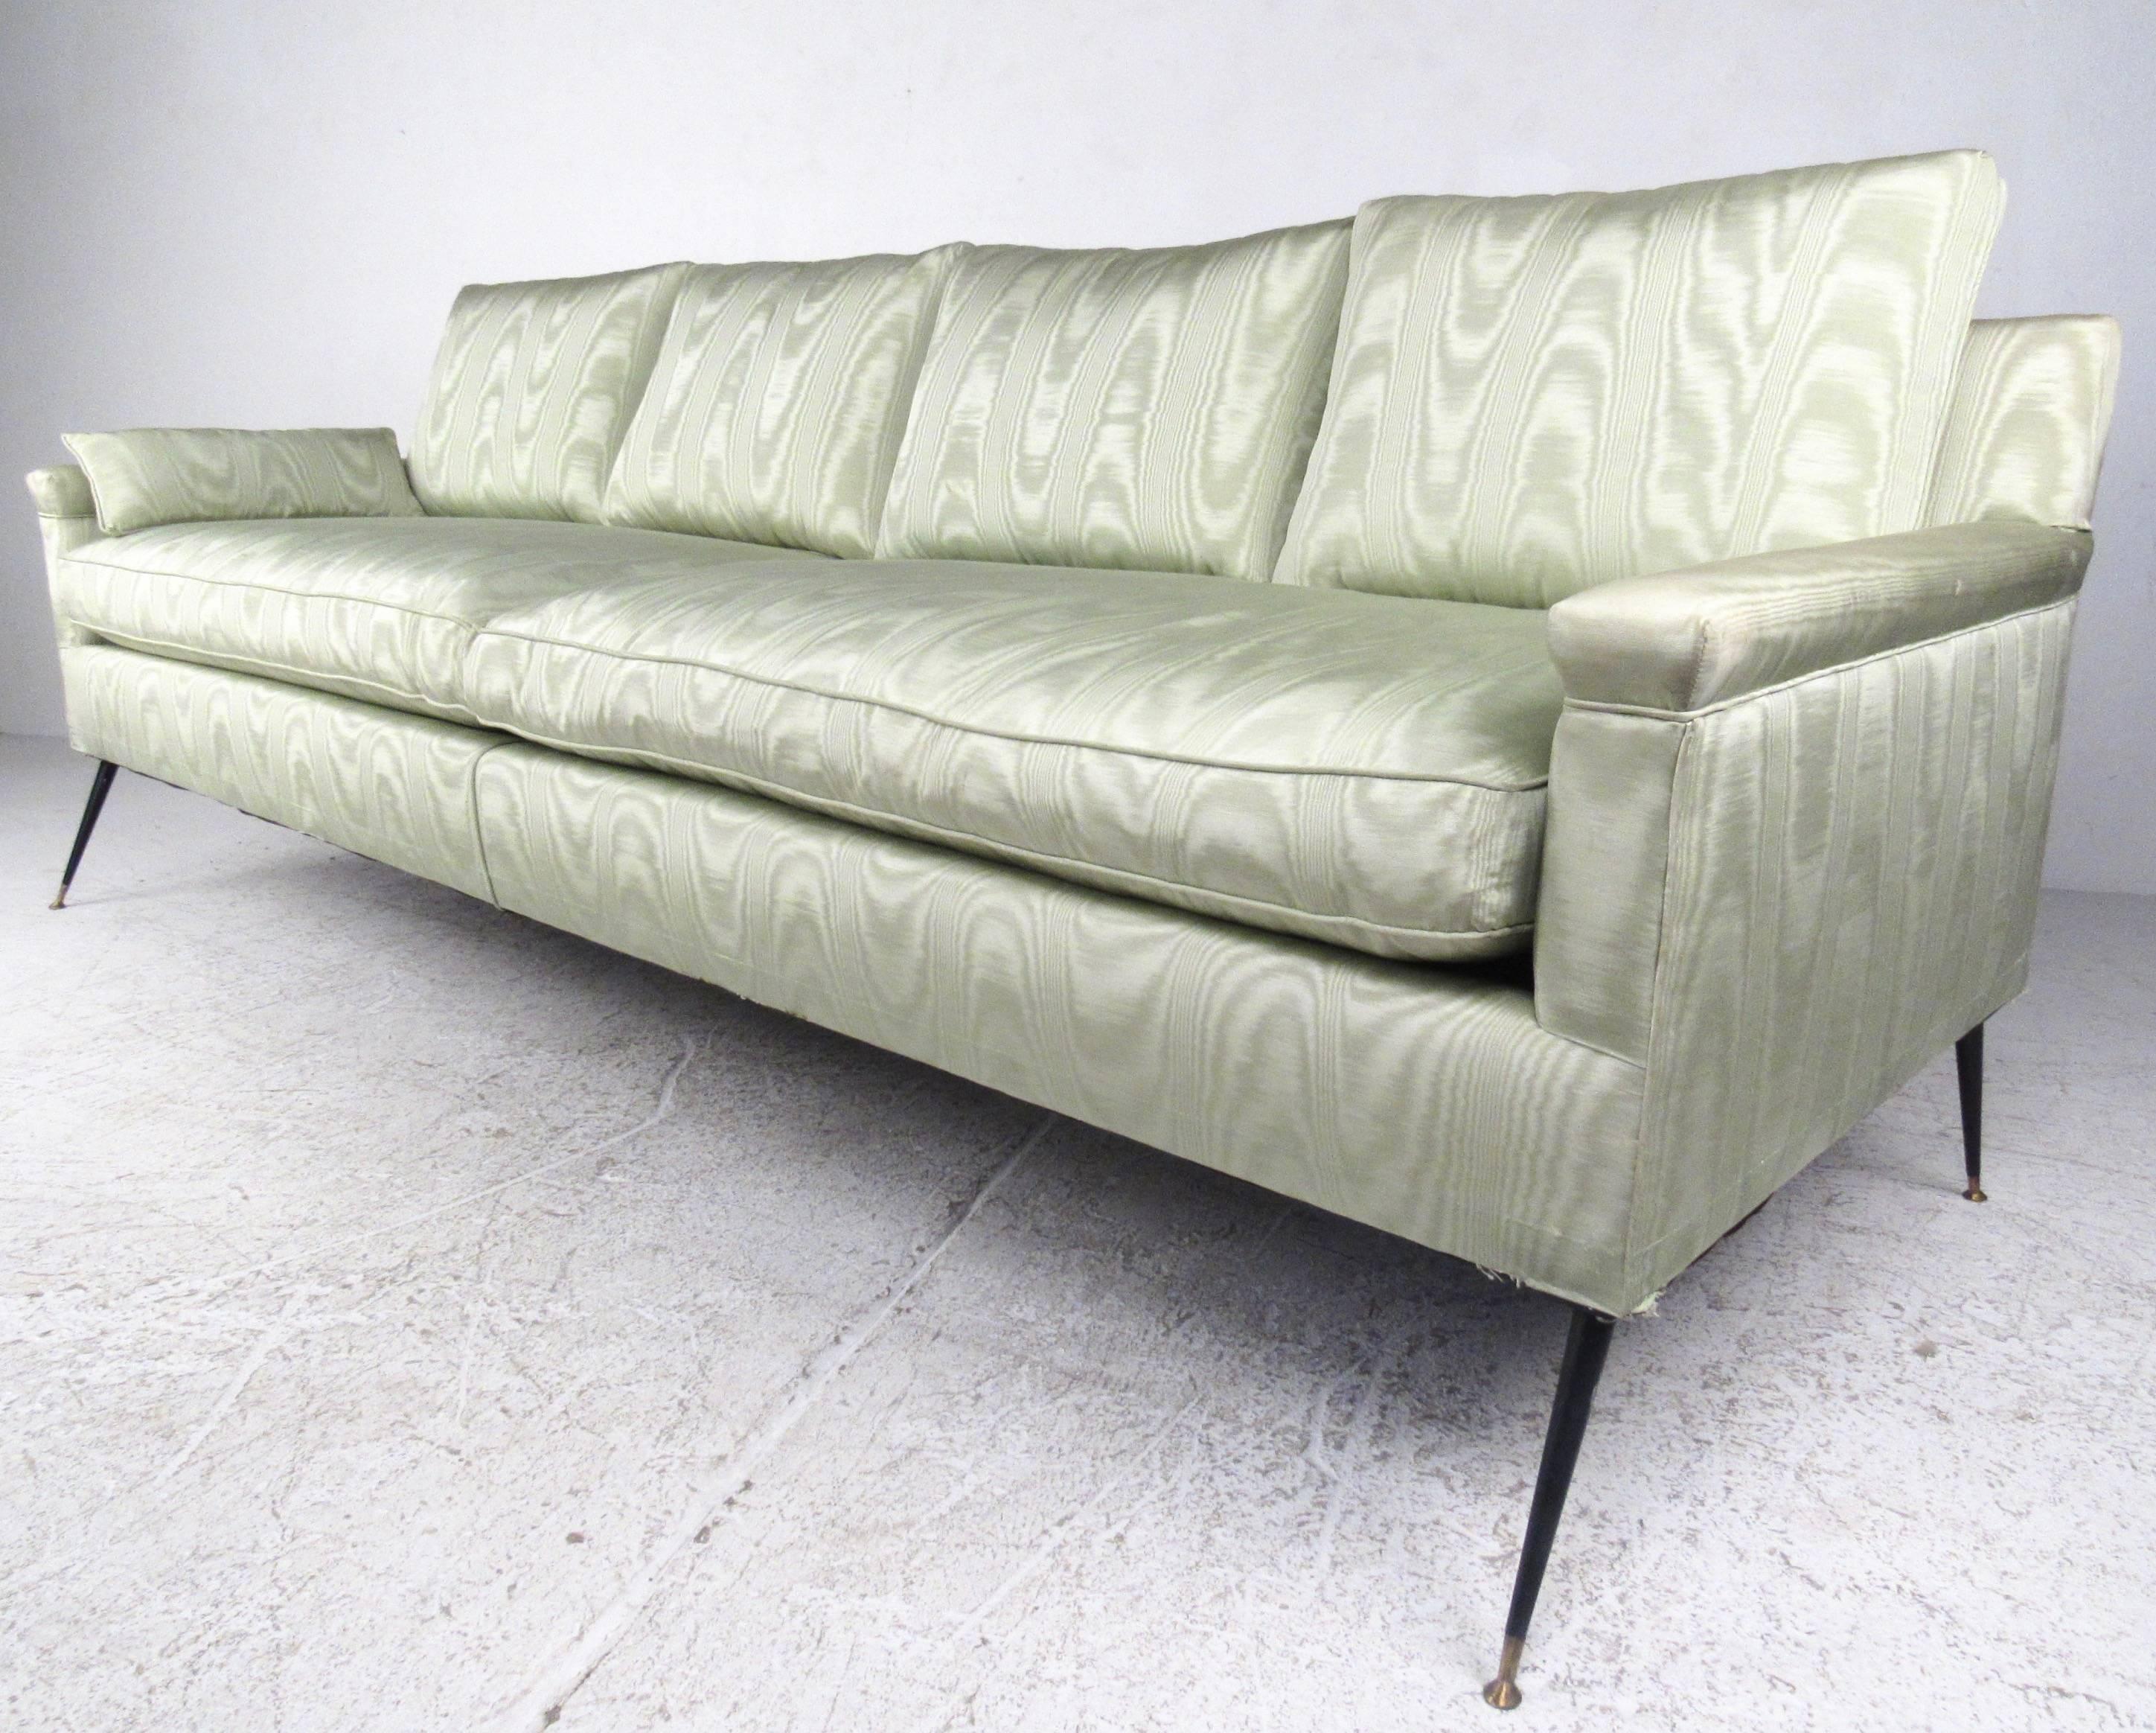 This four seat midcentury sofa features comfortable two cushion design complete with unique vintage fabric. Slender Italian style legs give the sofa a unique profile, while the wide and well stuffed seating makes this a comfortable addition to any